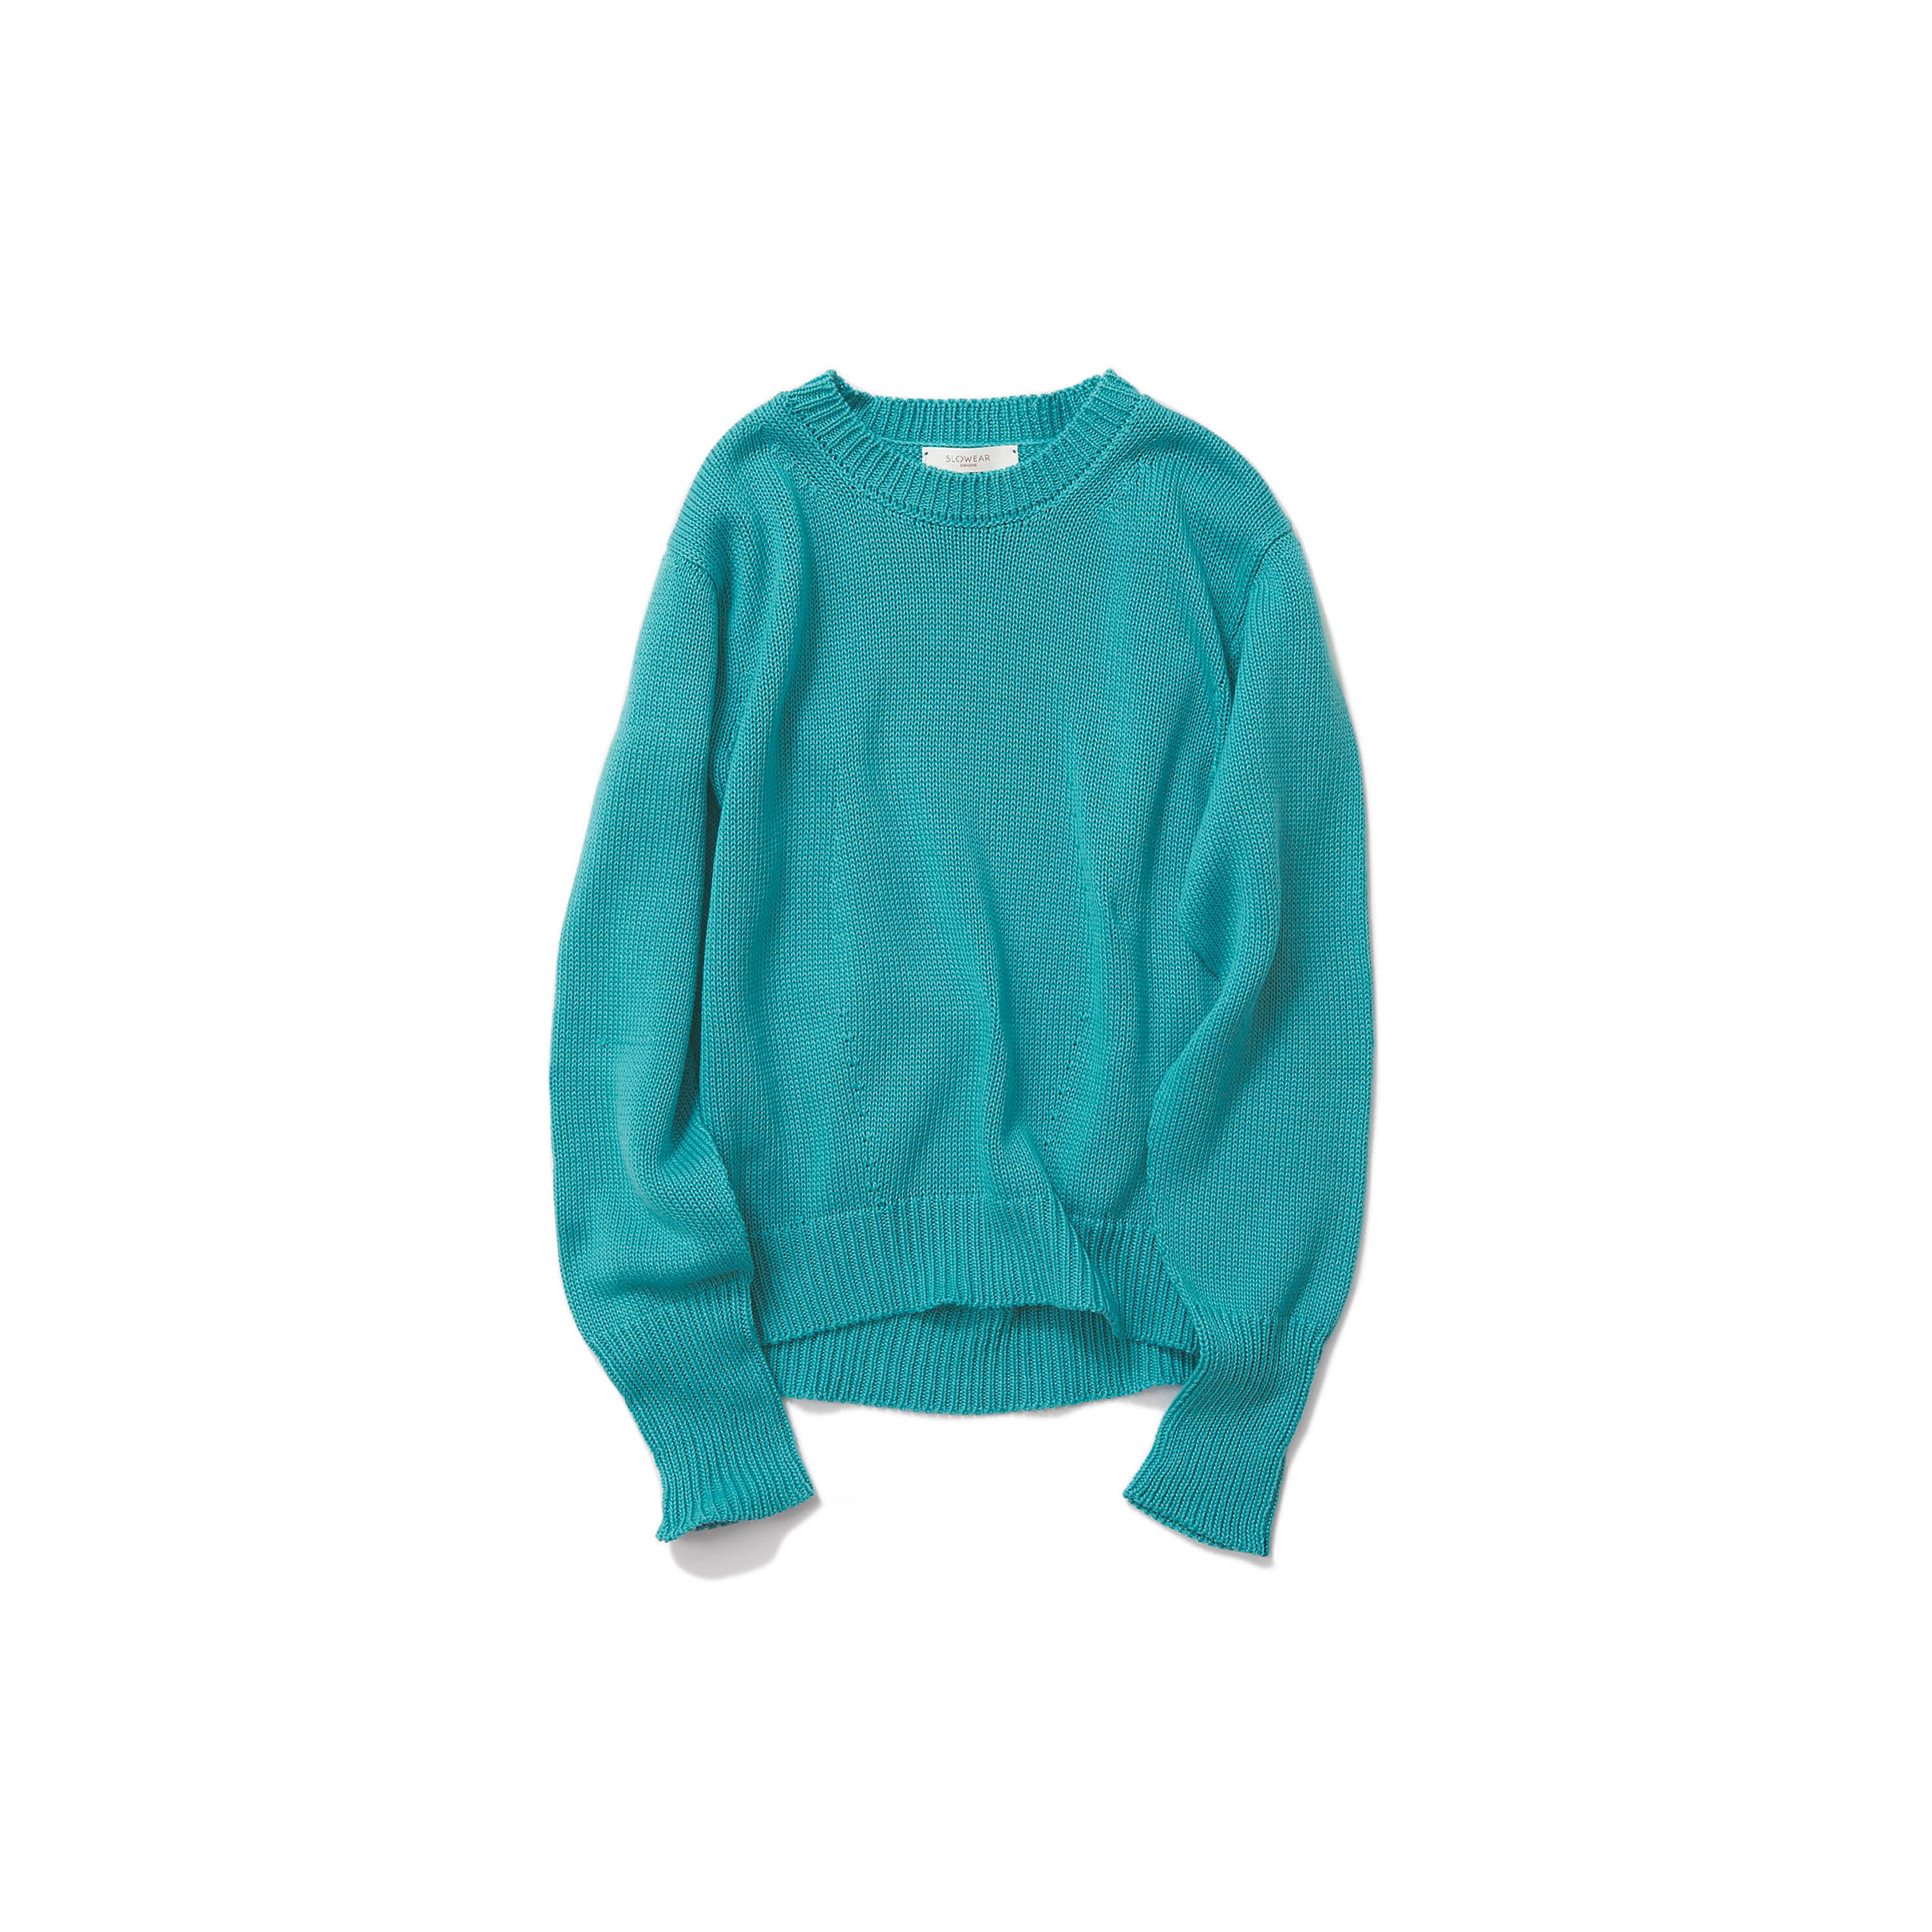 Ocean colored cotton knit sweater